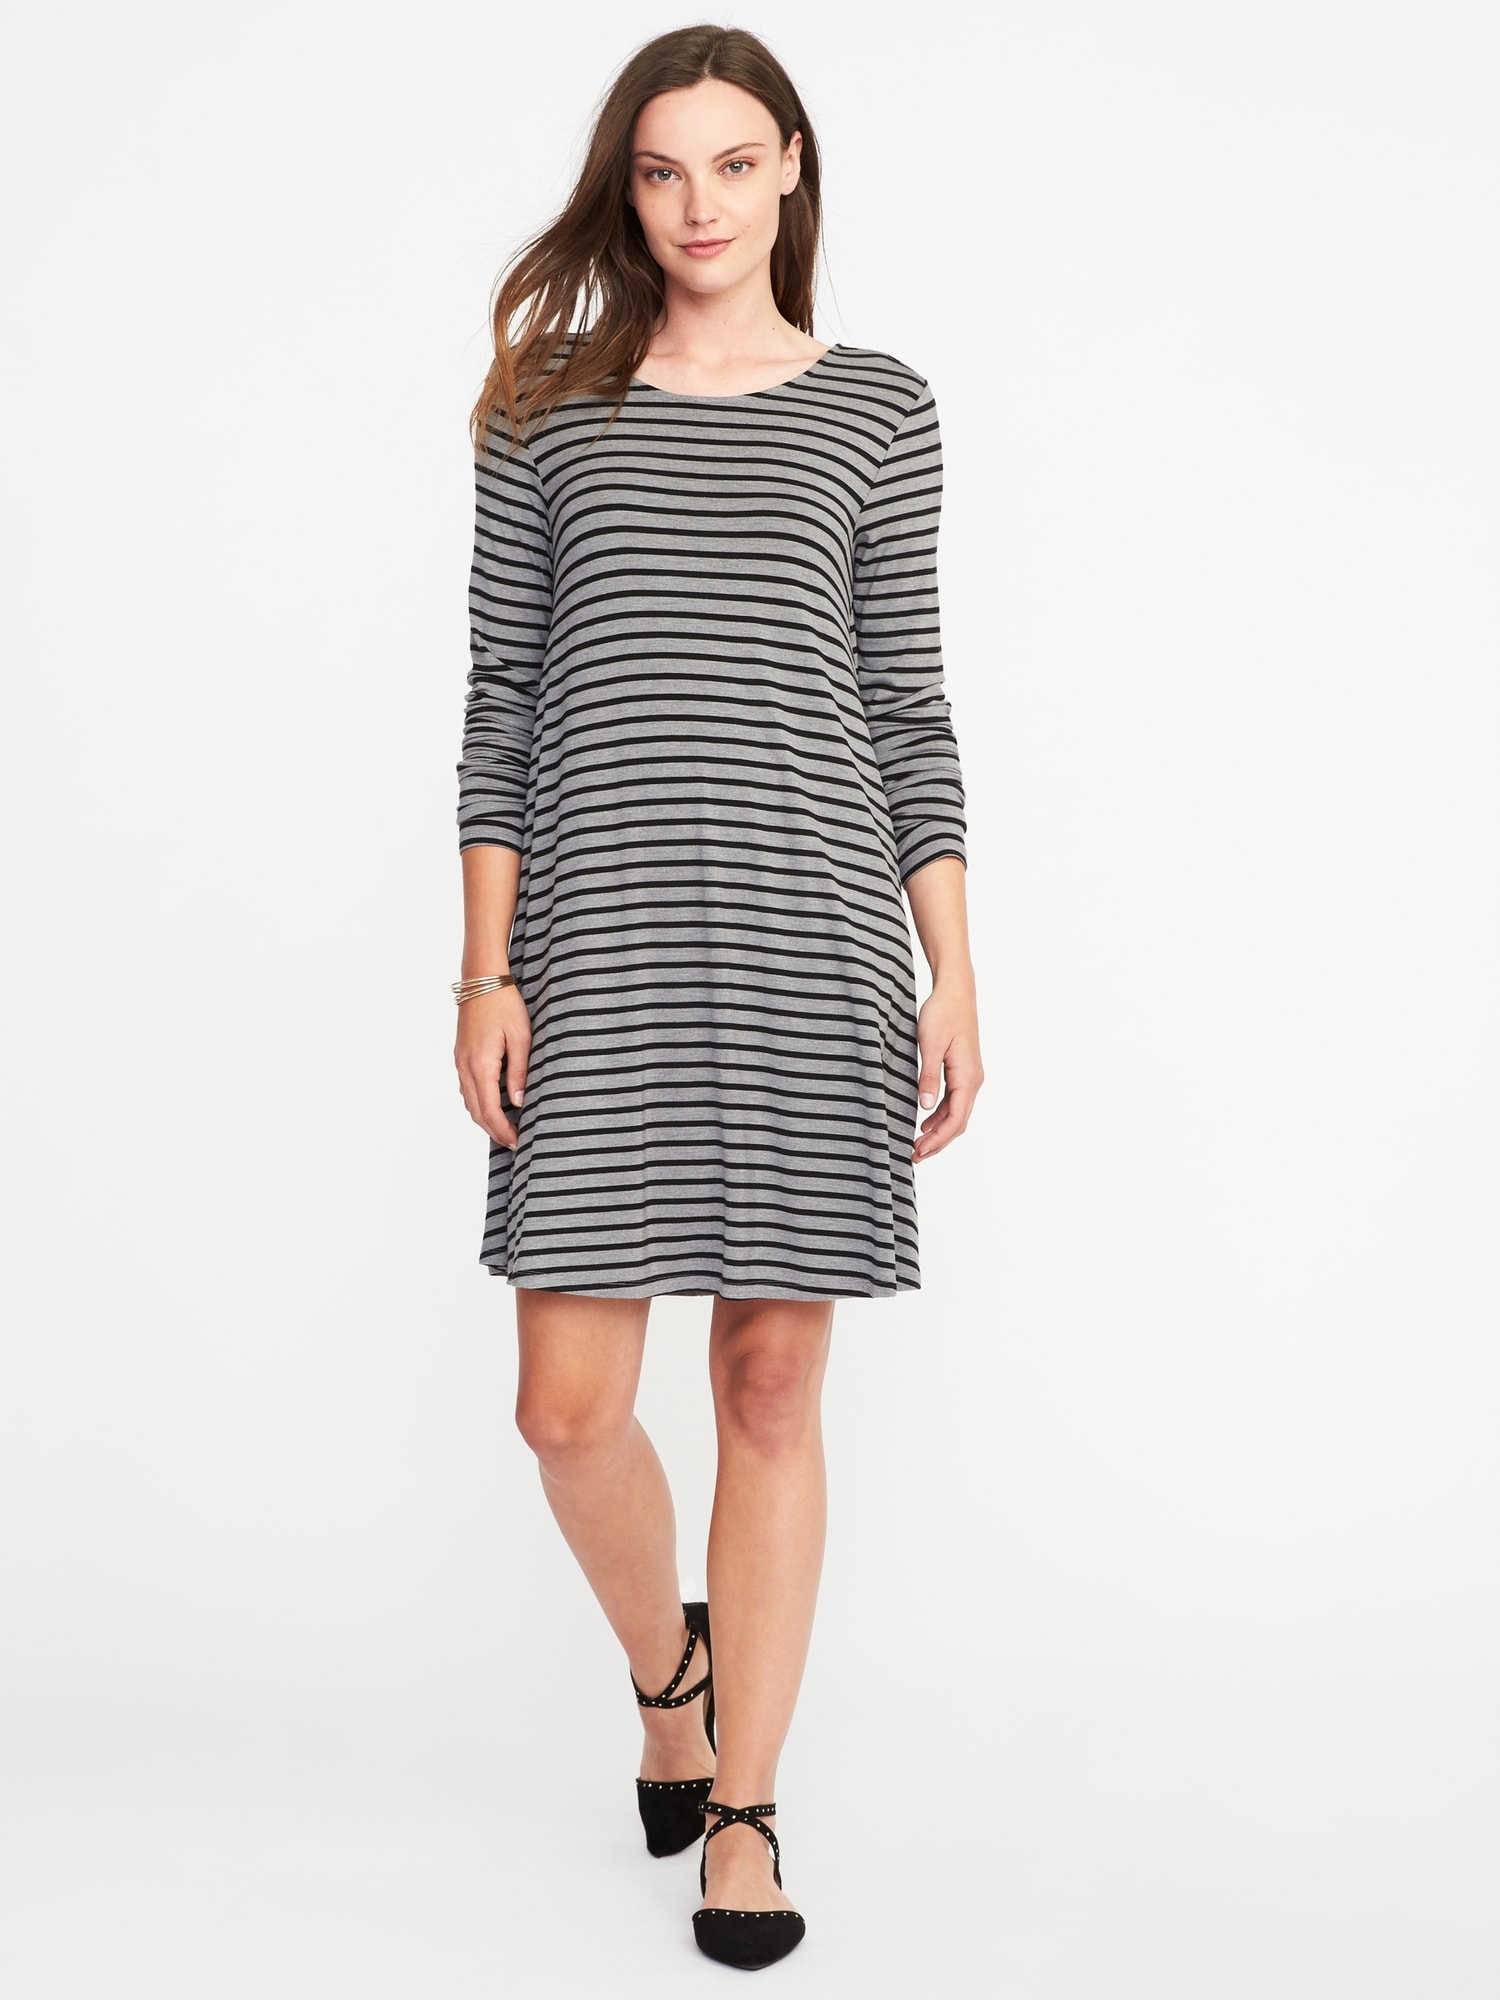 Image result for jersey knit swing dress old navy